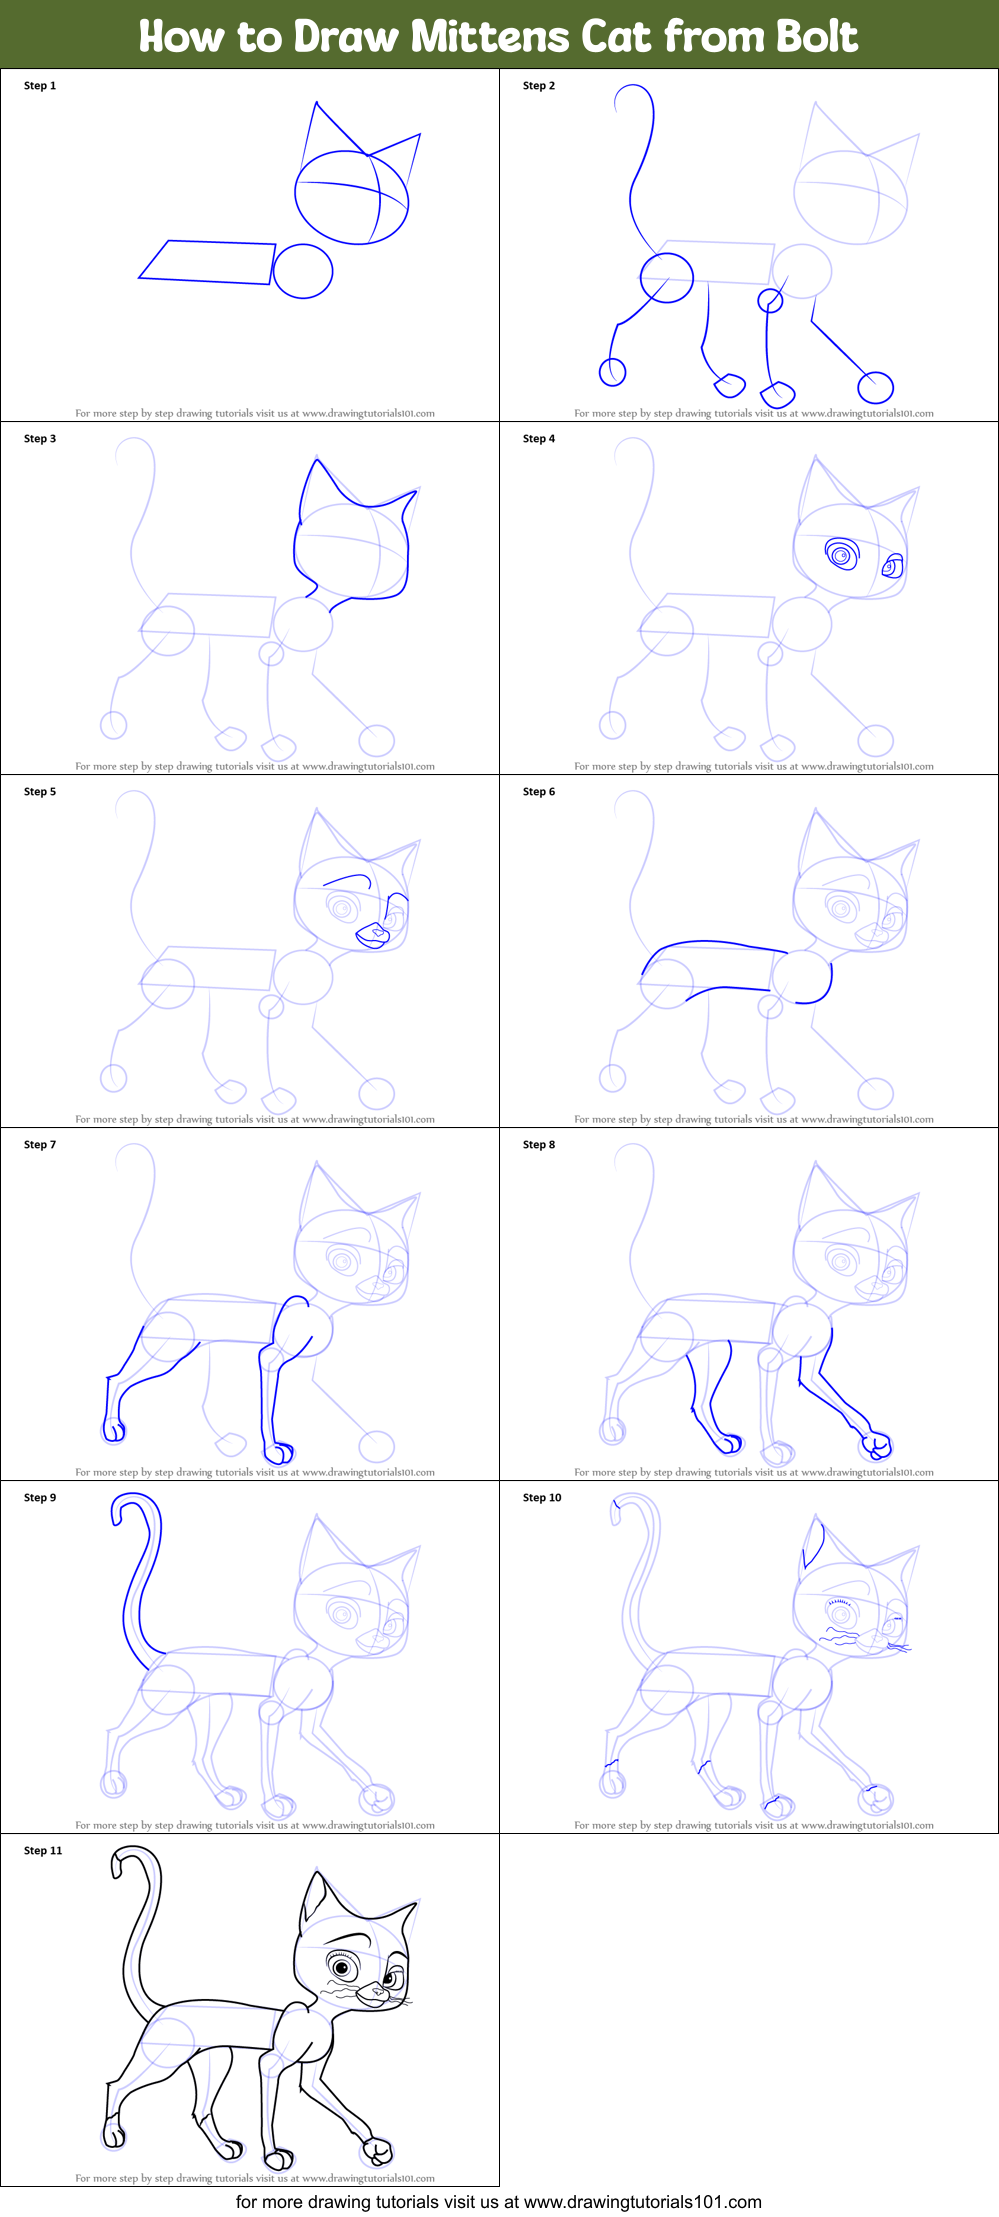 How To Draw Mittens Cat From Bolt Printable Step By Step Drawing Sheet